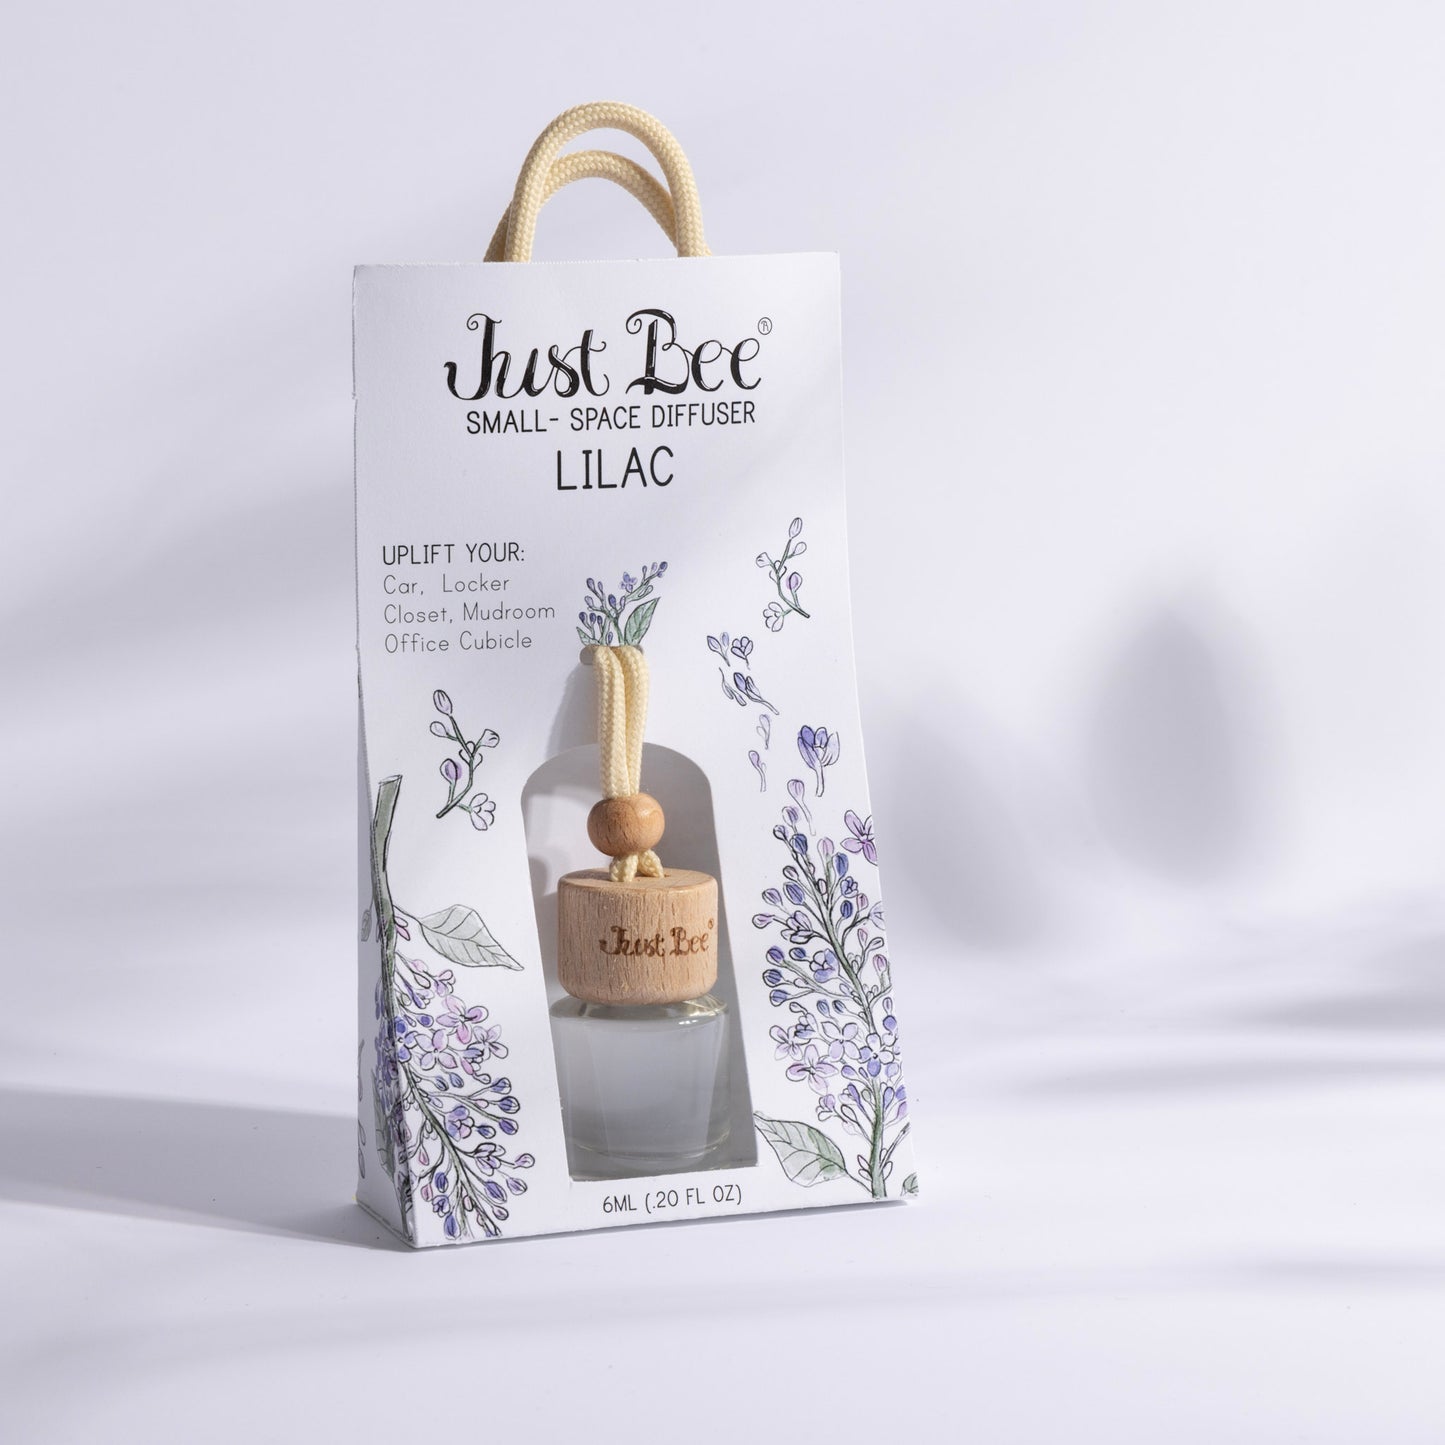 Small-Space Hanging Diffuser - Lilac